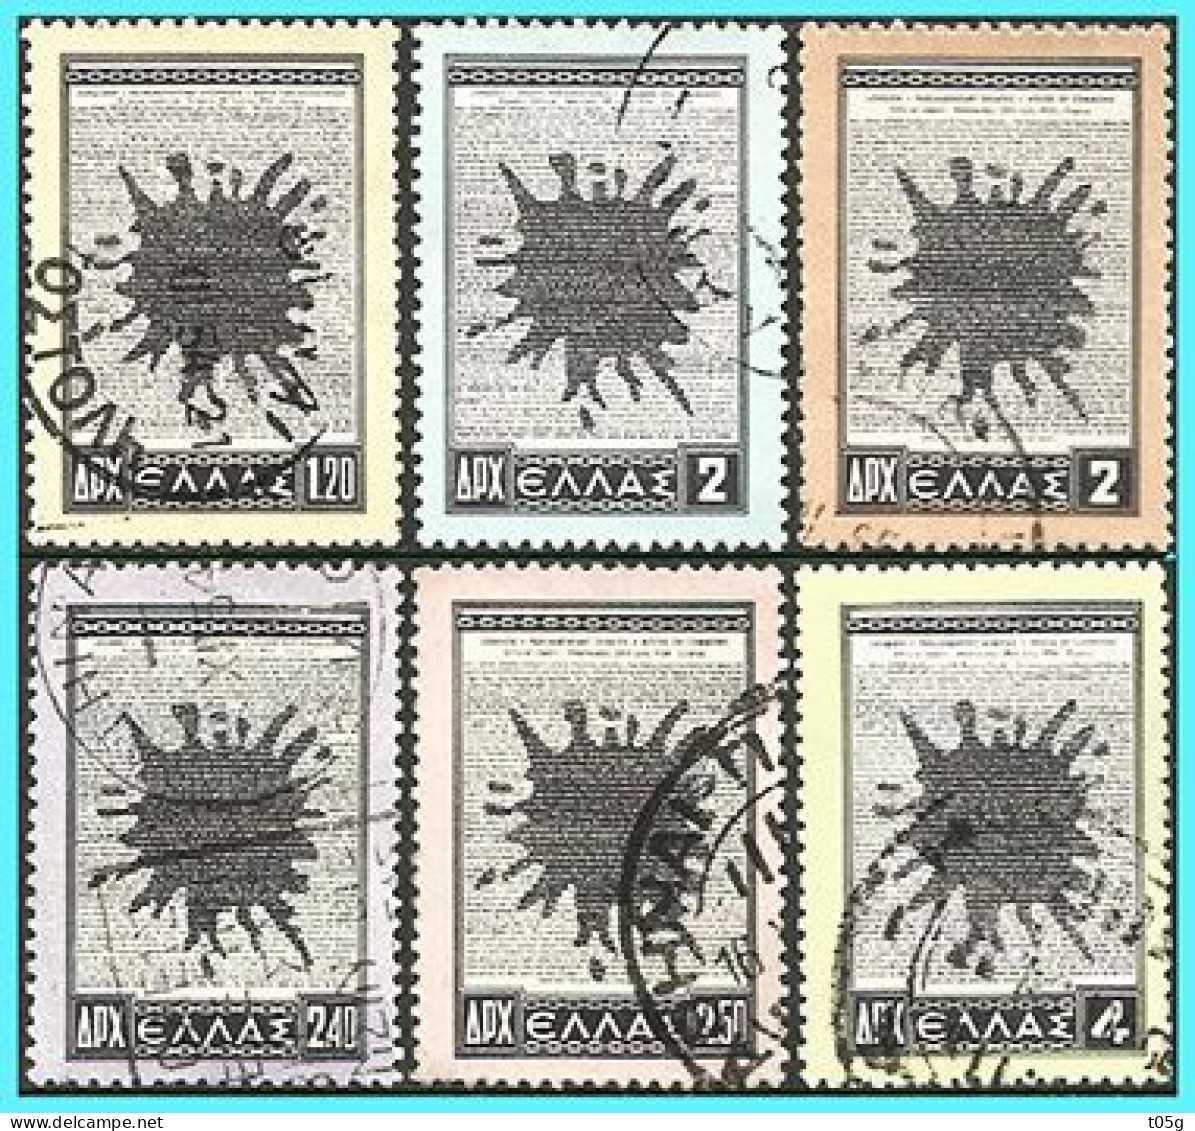 GREECE-GRECE- HELLAS 1954: "Union Of Cyprus Greece"  Compl. Set Used - Used Stamps